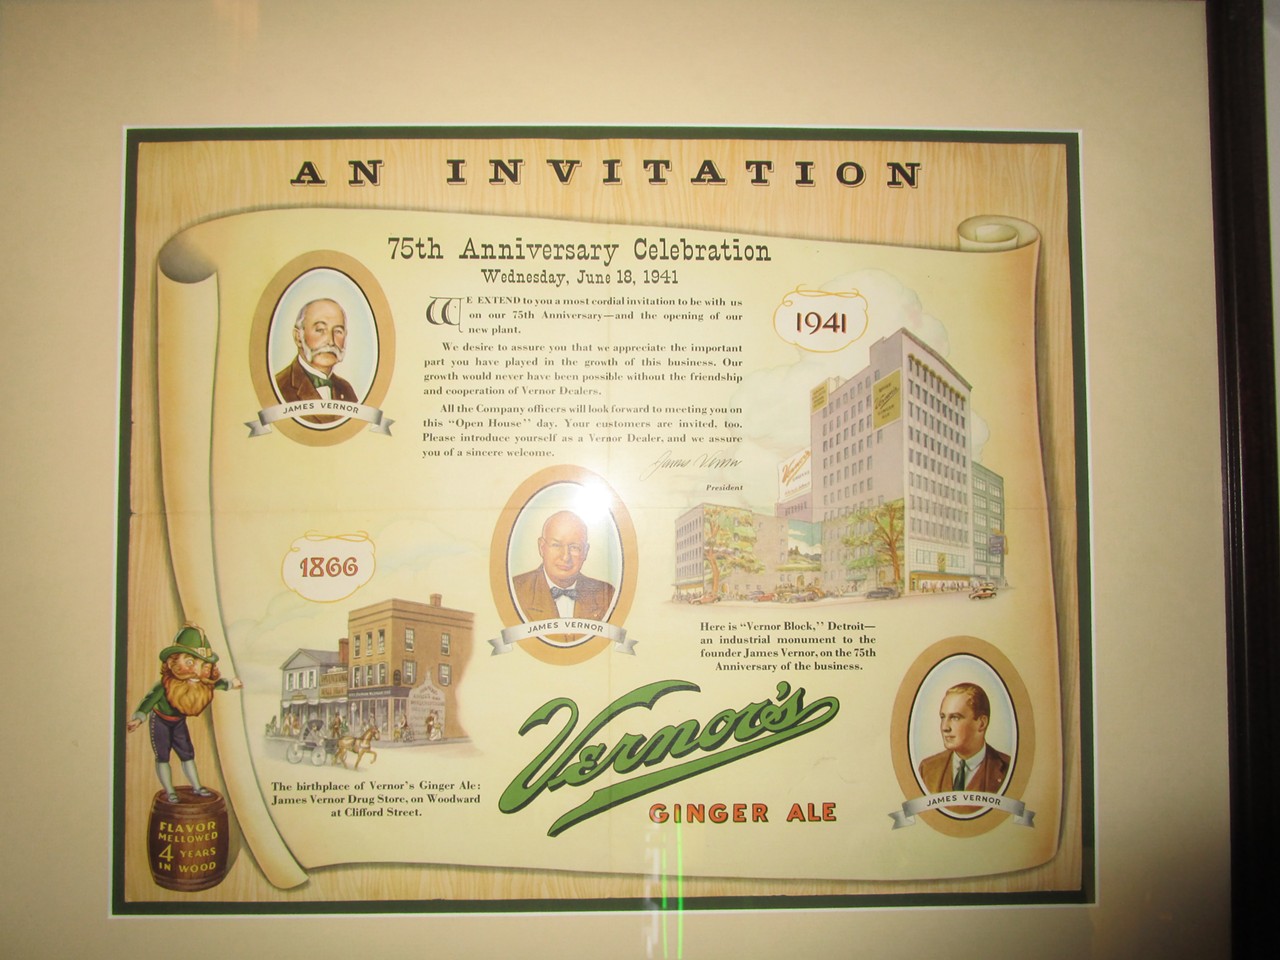 This framed document heralds the 75th anniversary of Vernor's. Wunderlich says, "Anniversaries were sort of a big deal. This is the 75th anniversary, the June 18th, 1940 one. So this was when Vernor's was still down on the river."